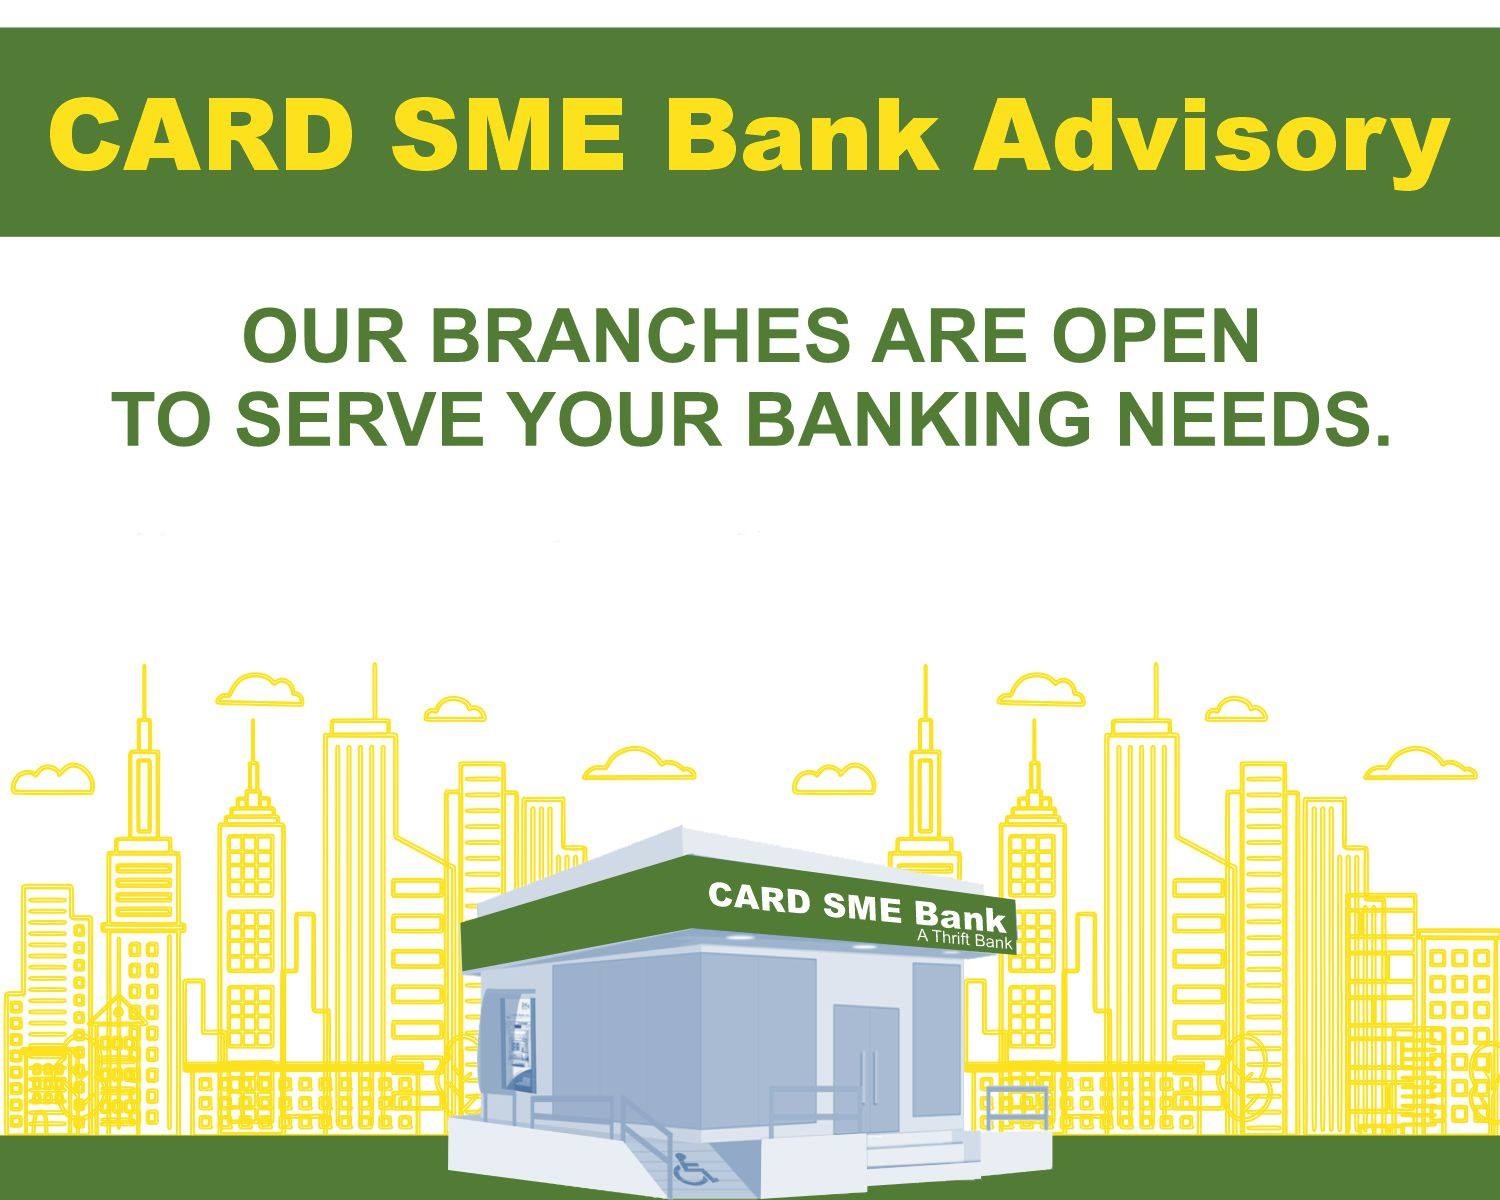 List of Branches and ATM Open